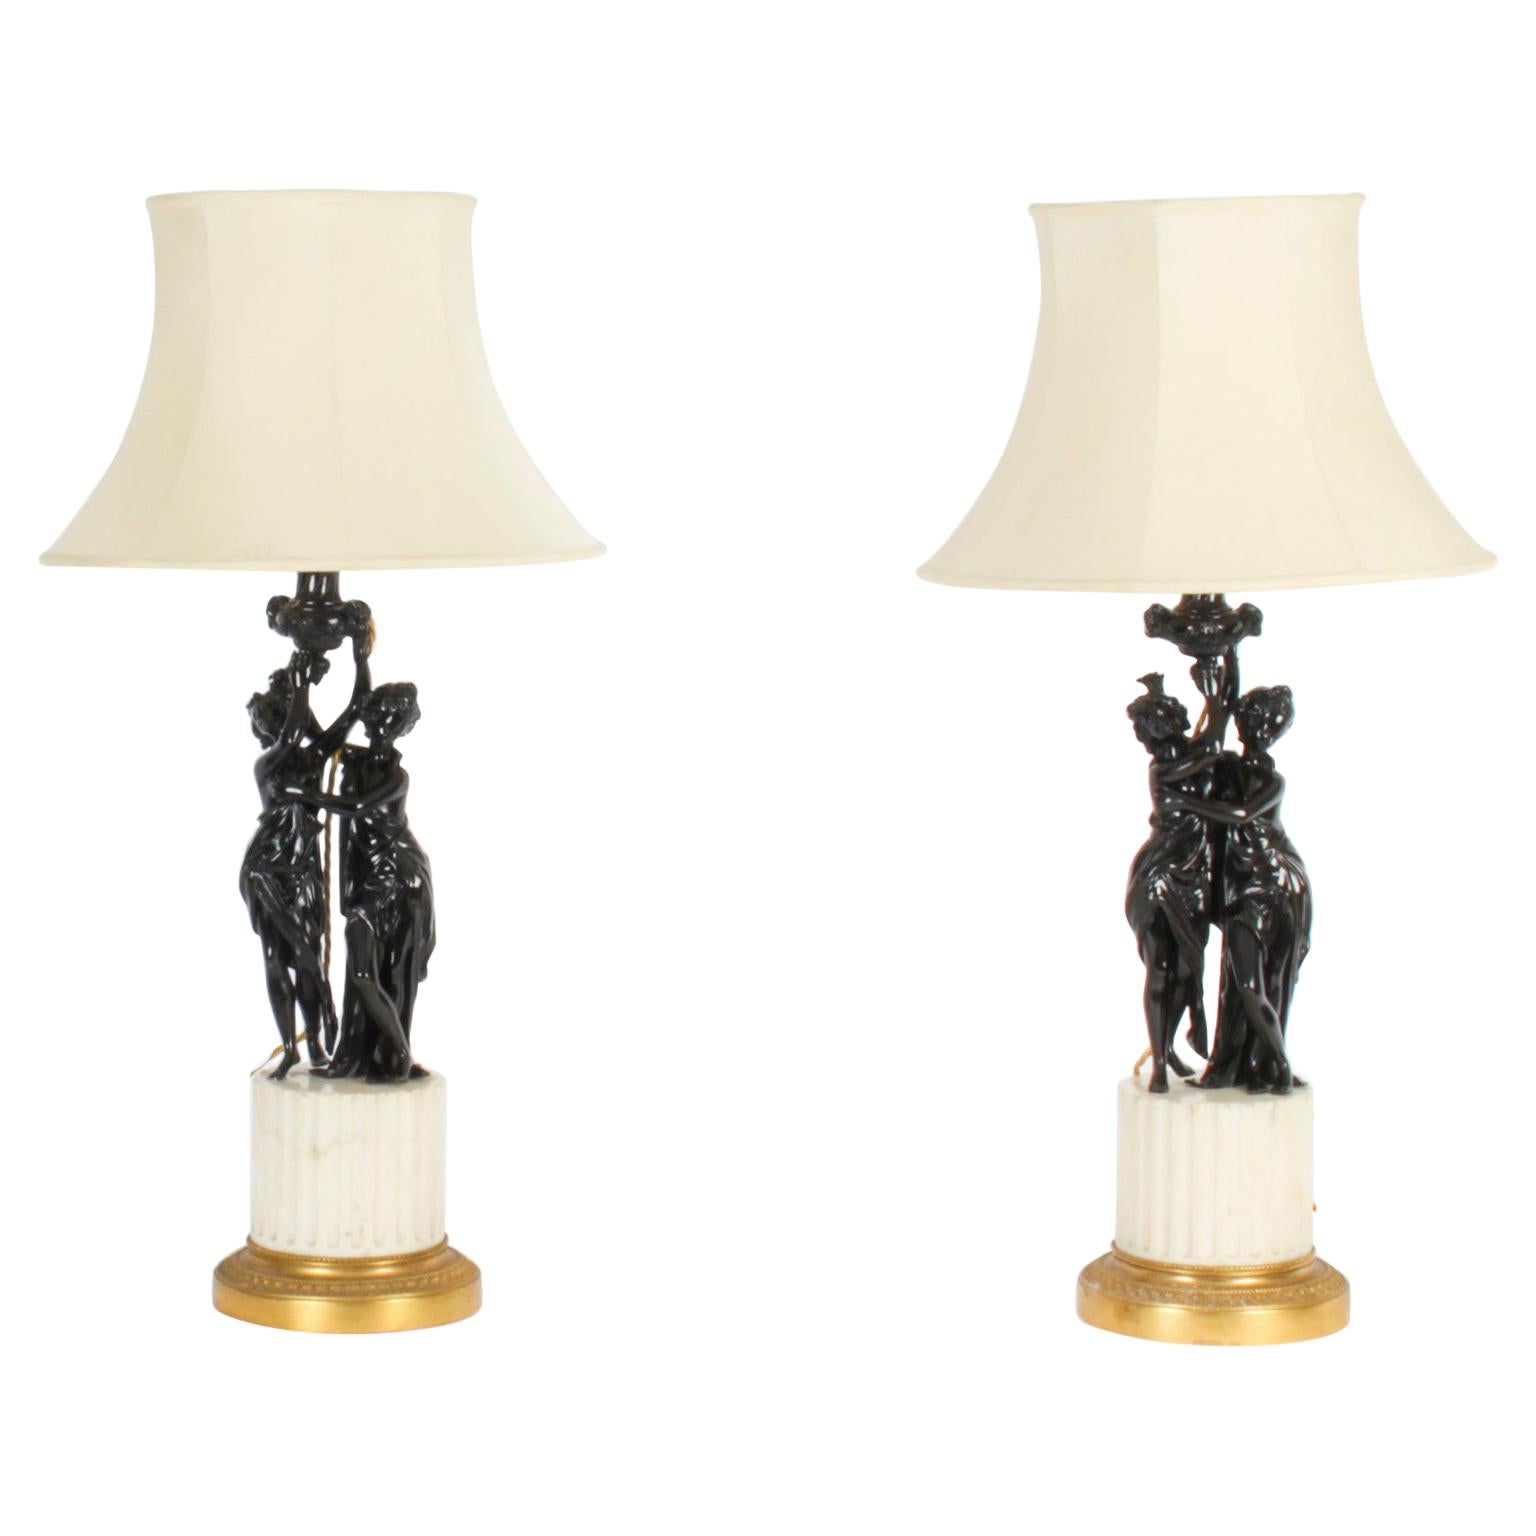 Antique Pair French Bronze Bacchantes Marble Table Lamps, 19th Century For Sale